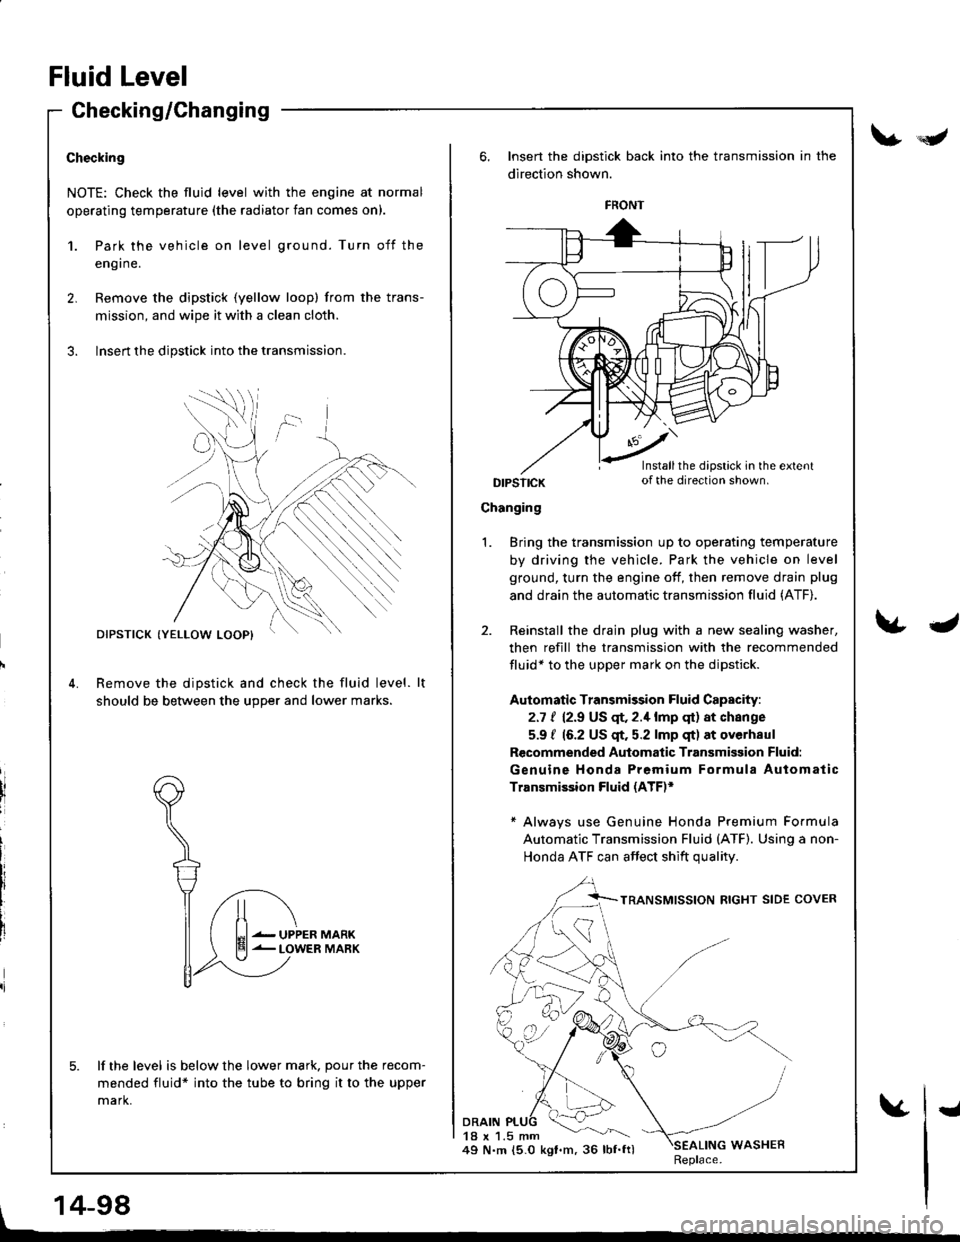 HONDA INTEGRA 1998 4.G Workshop Manual Checking/Changing
Checking
NOTE: Check the fluid level with the engine at normal
operating temperature (the radiator fan comes on).
1.
2.
Park the vehicle on level ground. Turn off the
eng I ne.
Remov